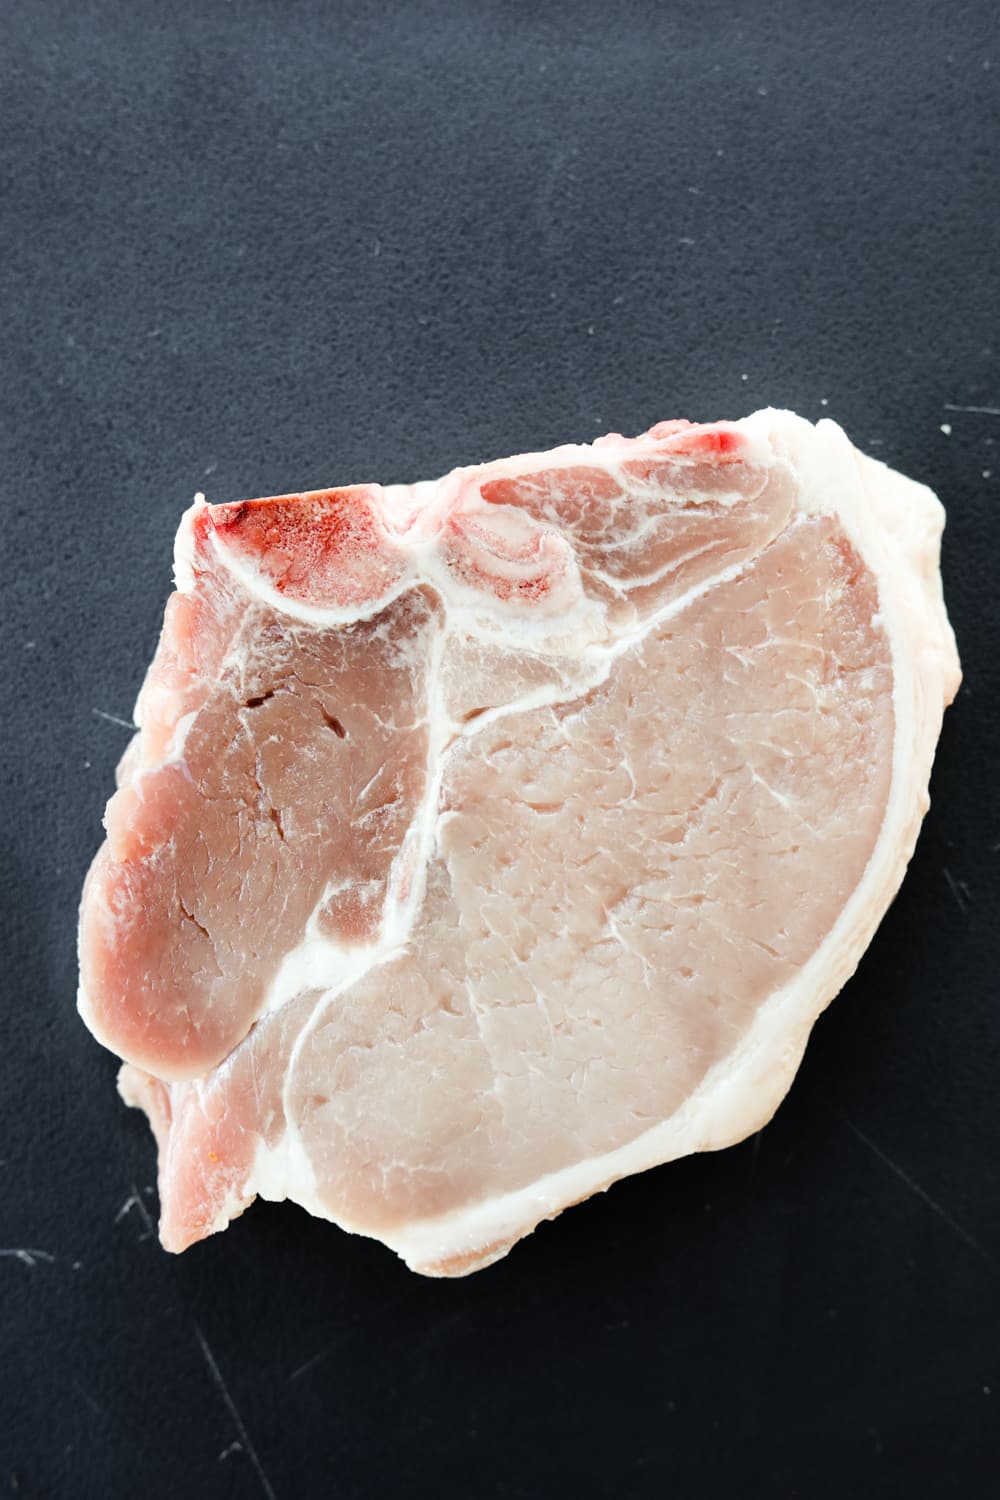 An uncooked pork chop on a black cutting board.